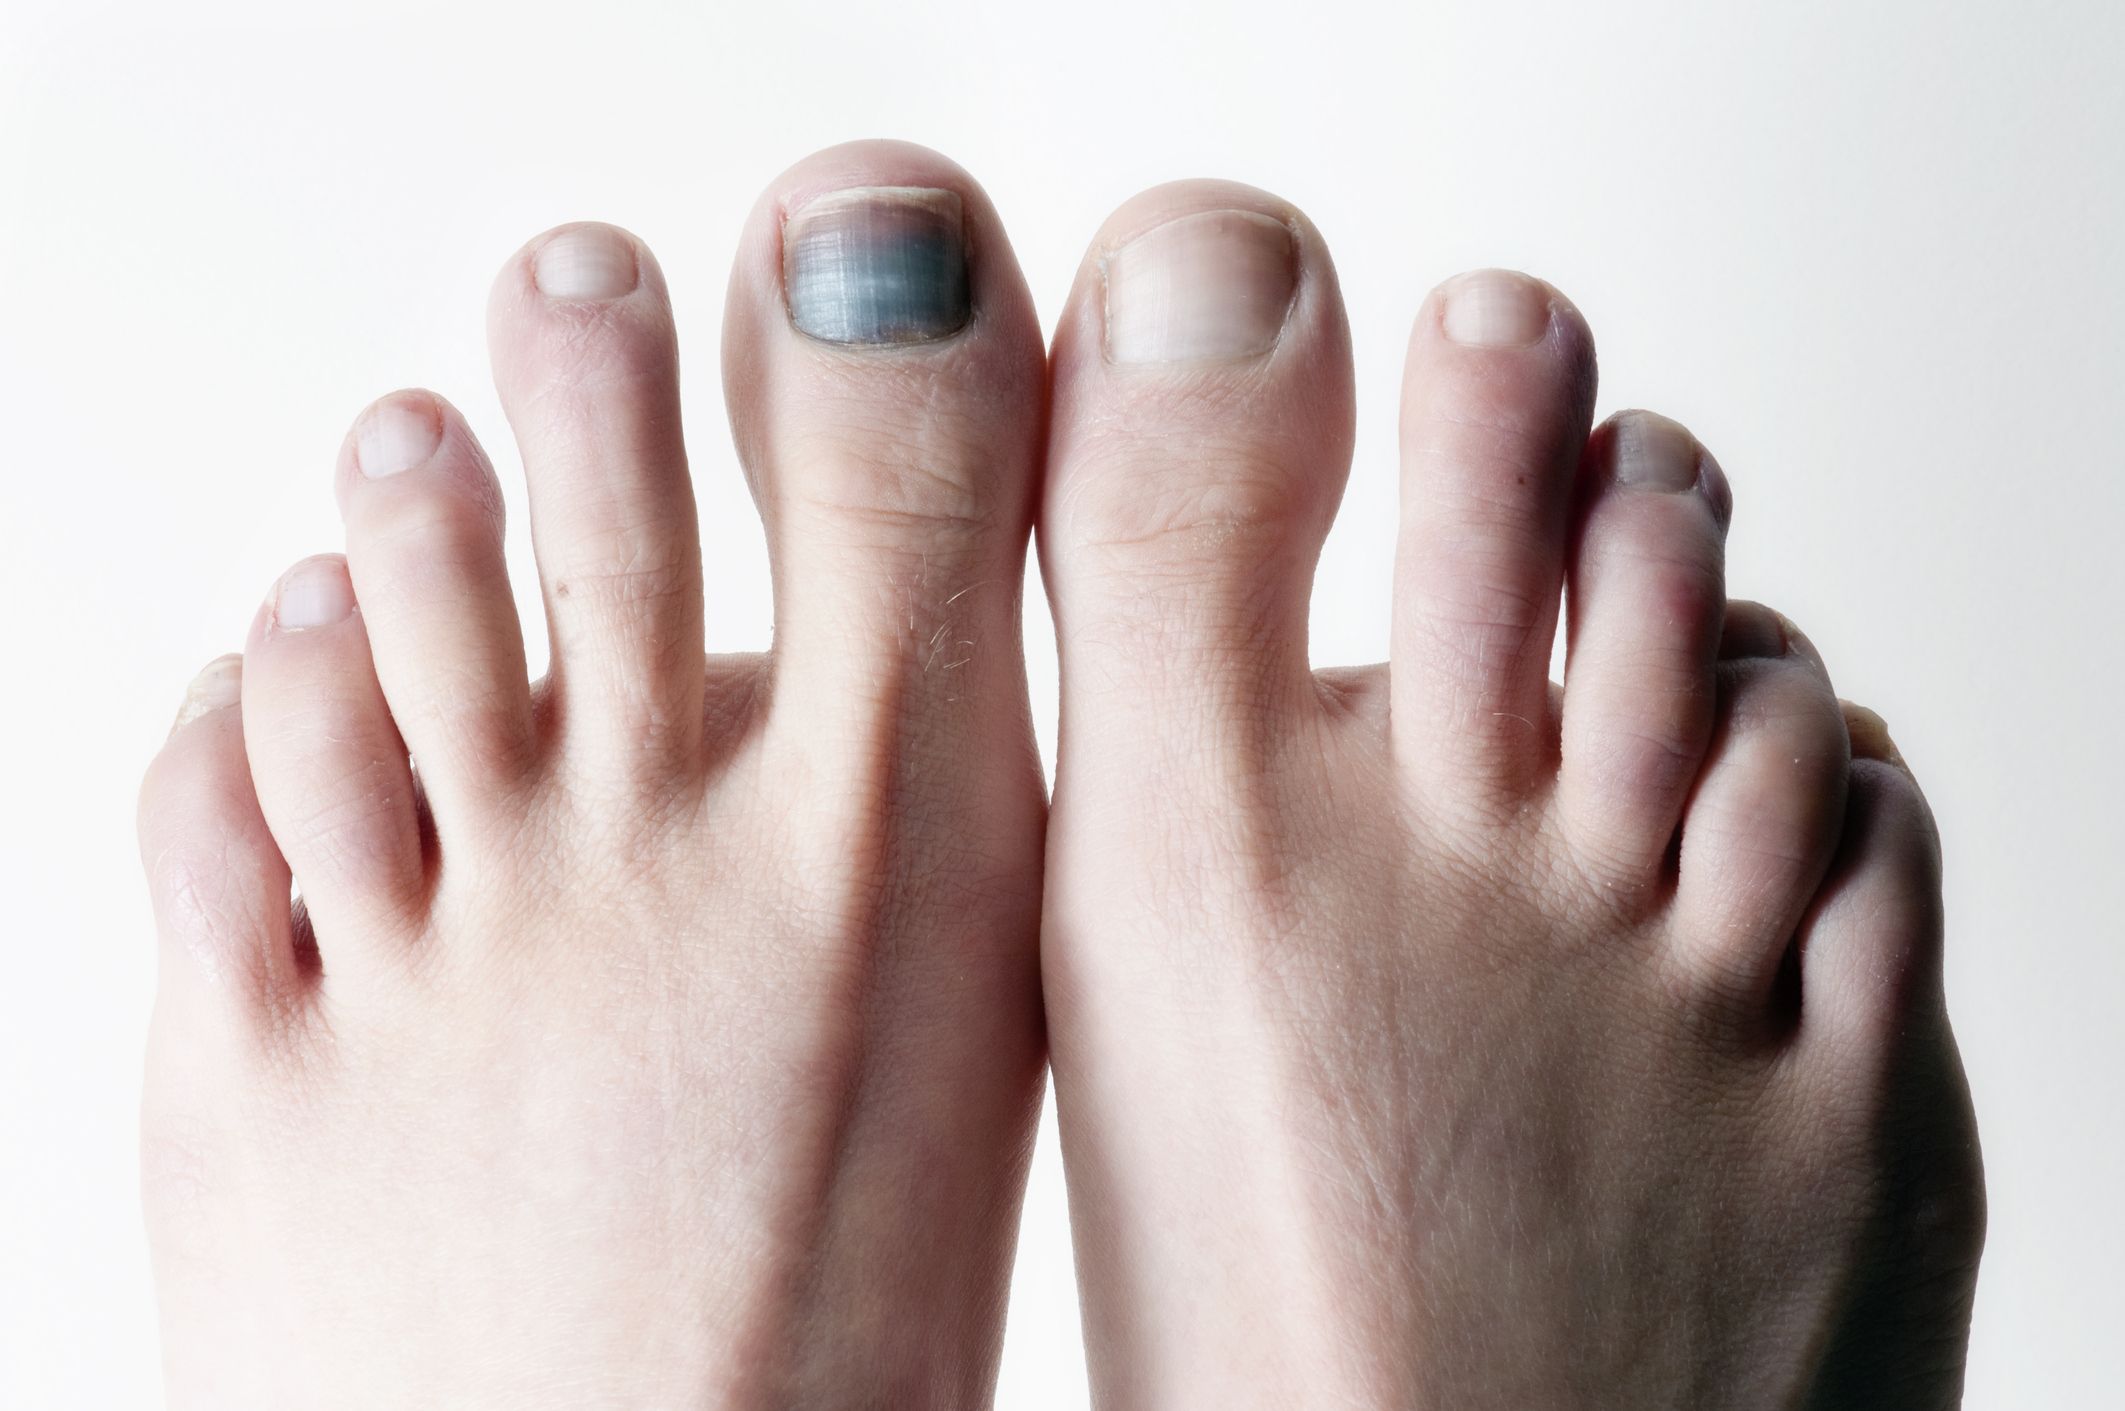 Nail Injury Treatment of Bruises and Fractures. Damage To the Nail Phalanx.  the Effect of Wearing Uncomfortable Shoes Stock Image - Image of infection,  bruises: 176681169